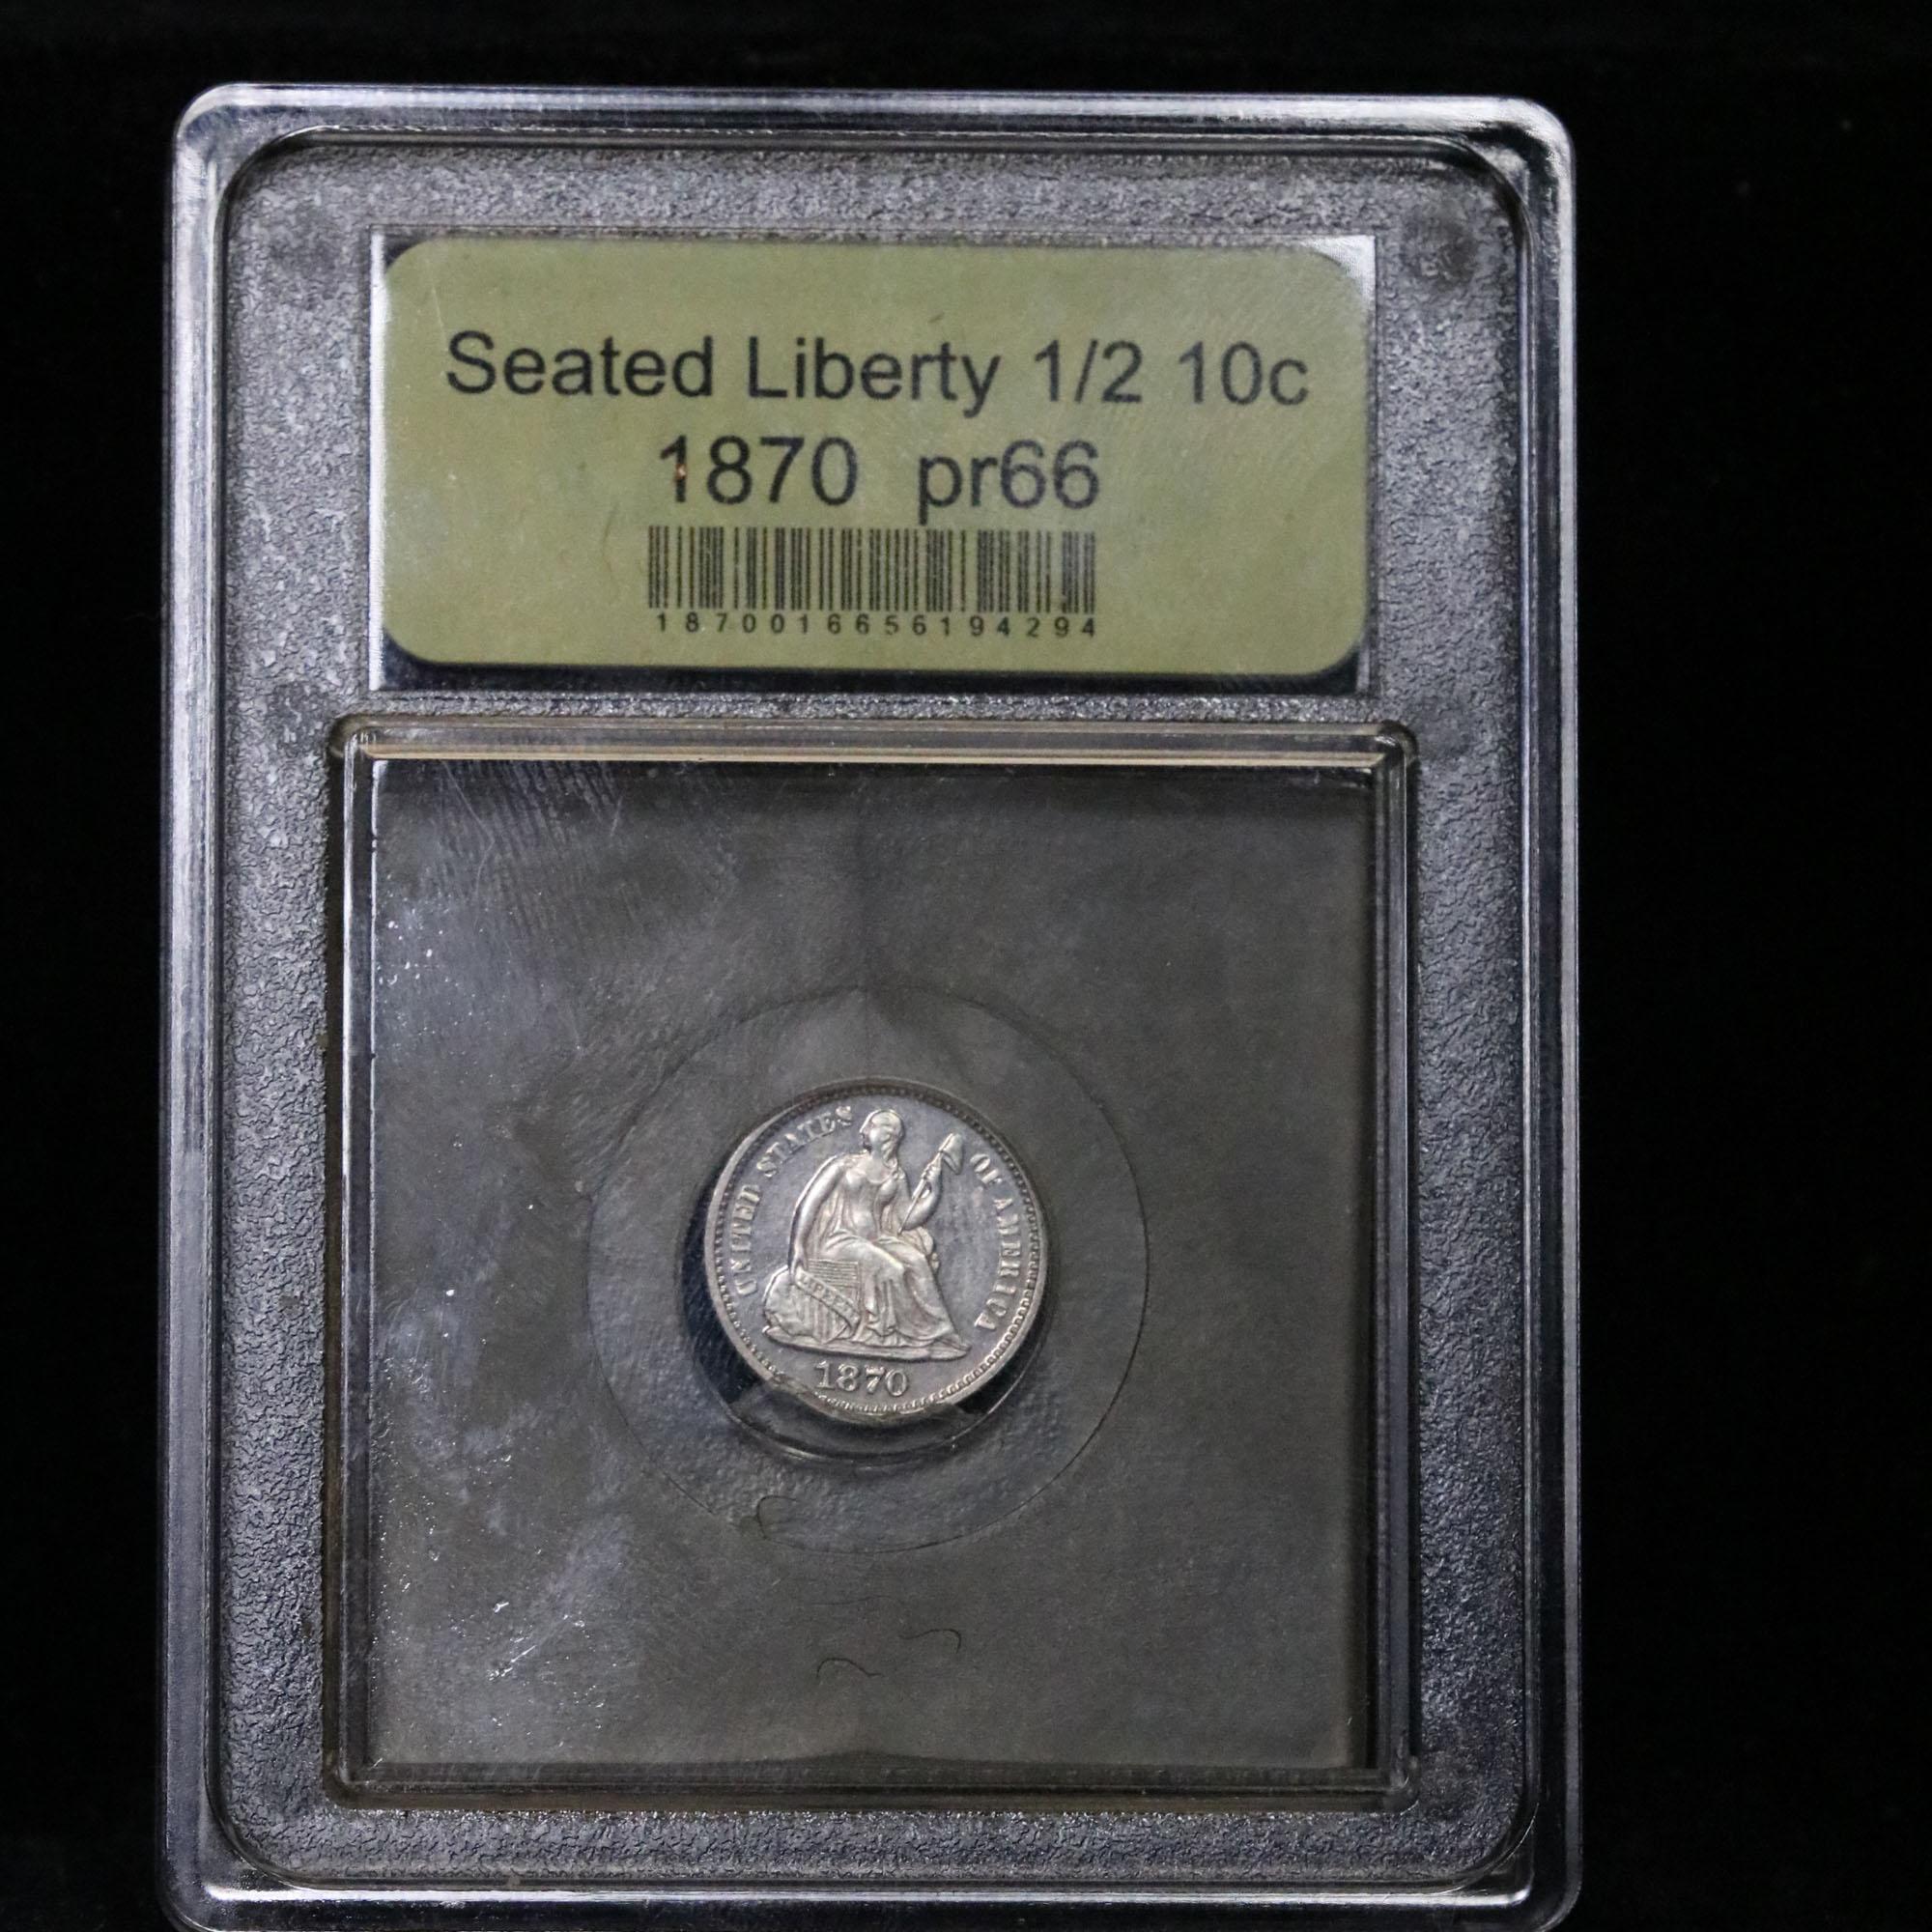 ***Auction Highlight*** 1870 Seated Liberty Half Dime 1/2 10c Graded GEM+ Proof by USCG (fc)